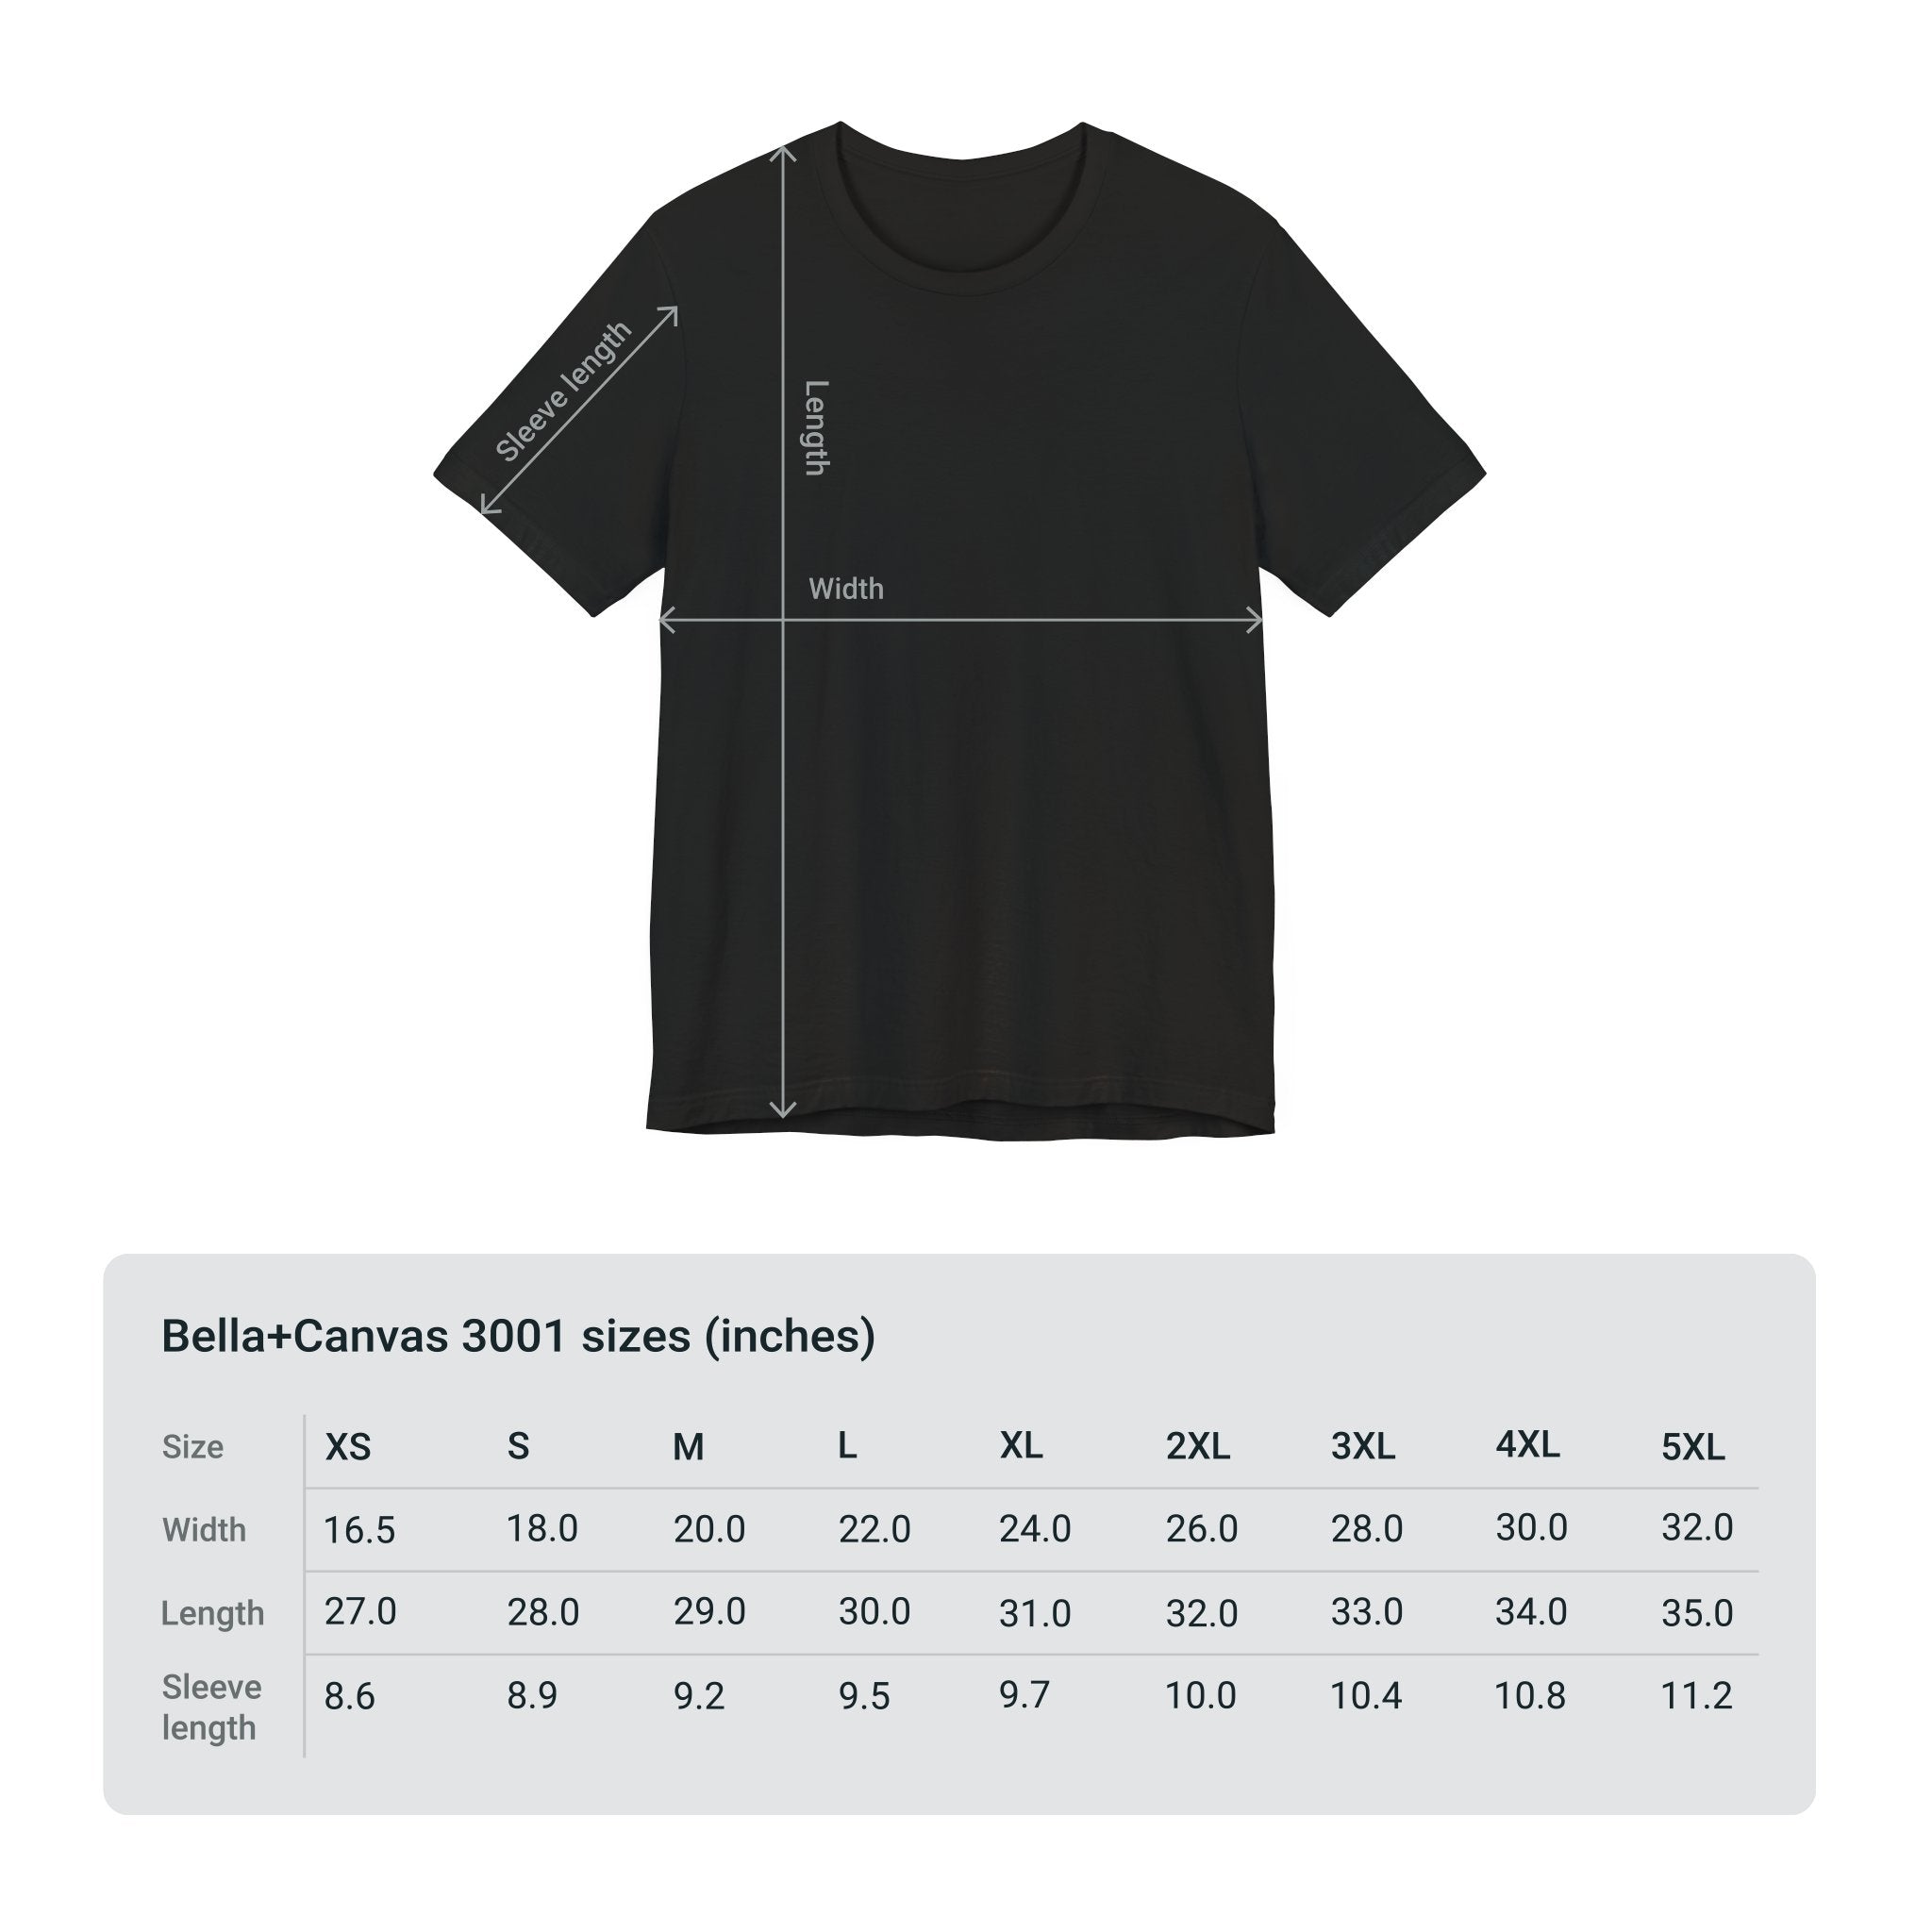 Adventure Unlimited black t-shirt with size measurements, direct-to-garment printed item